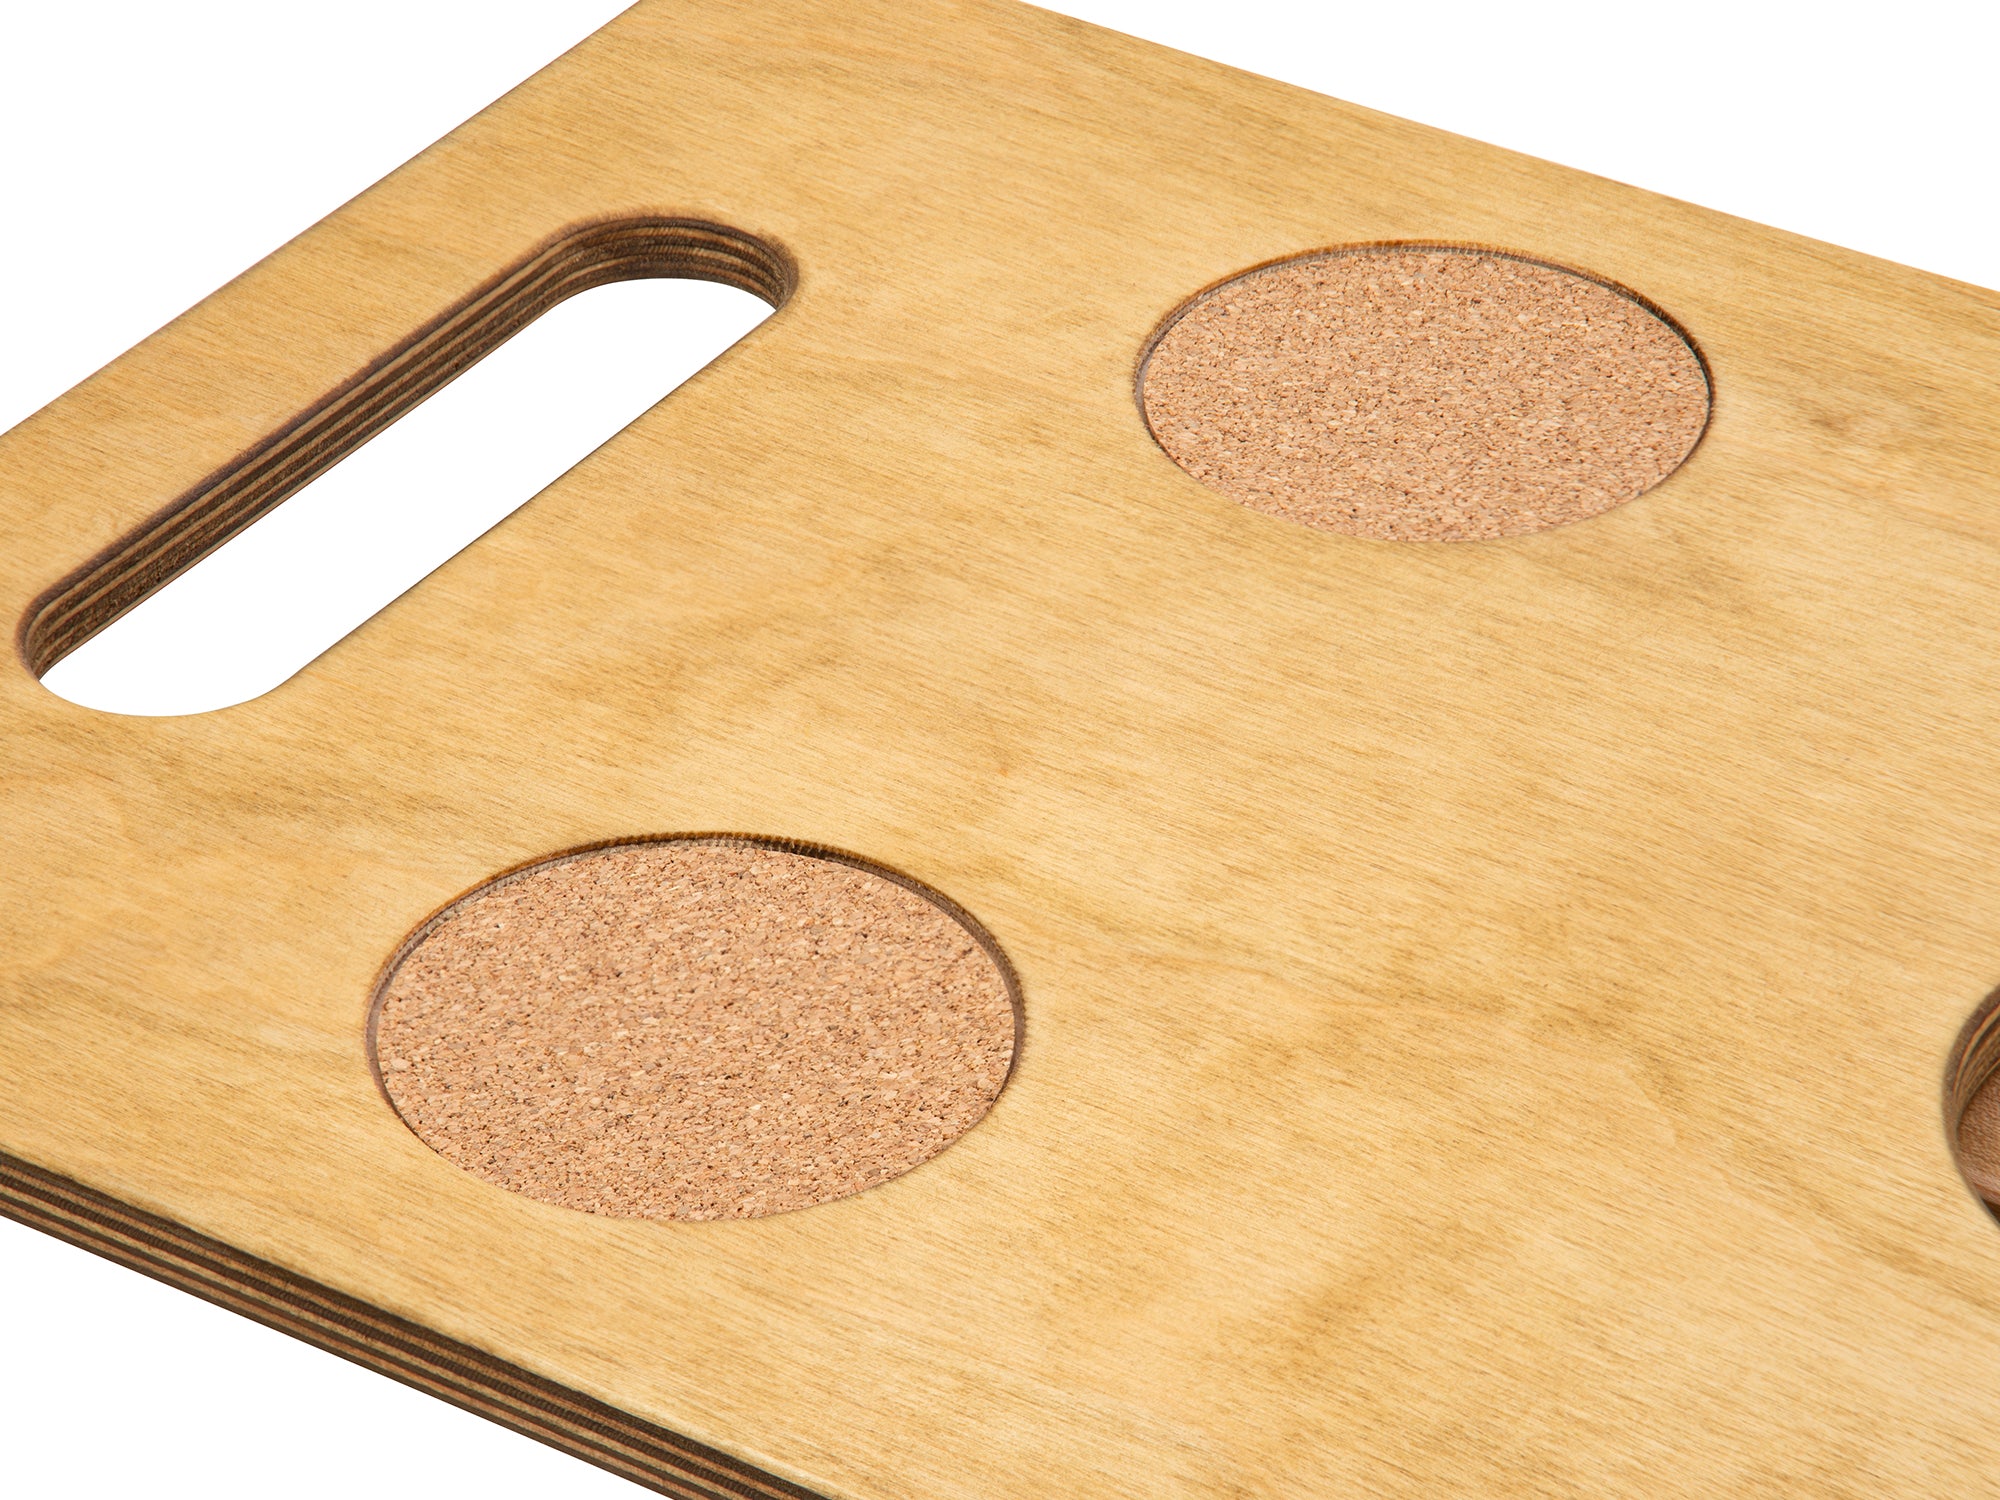 Non slip cork pads Goulburn portable beach table top in naturally sunkissed color